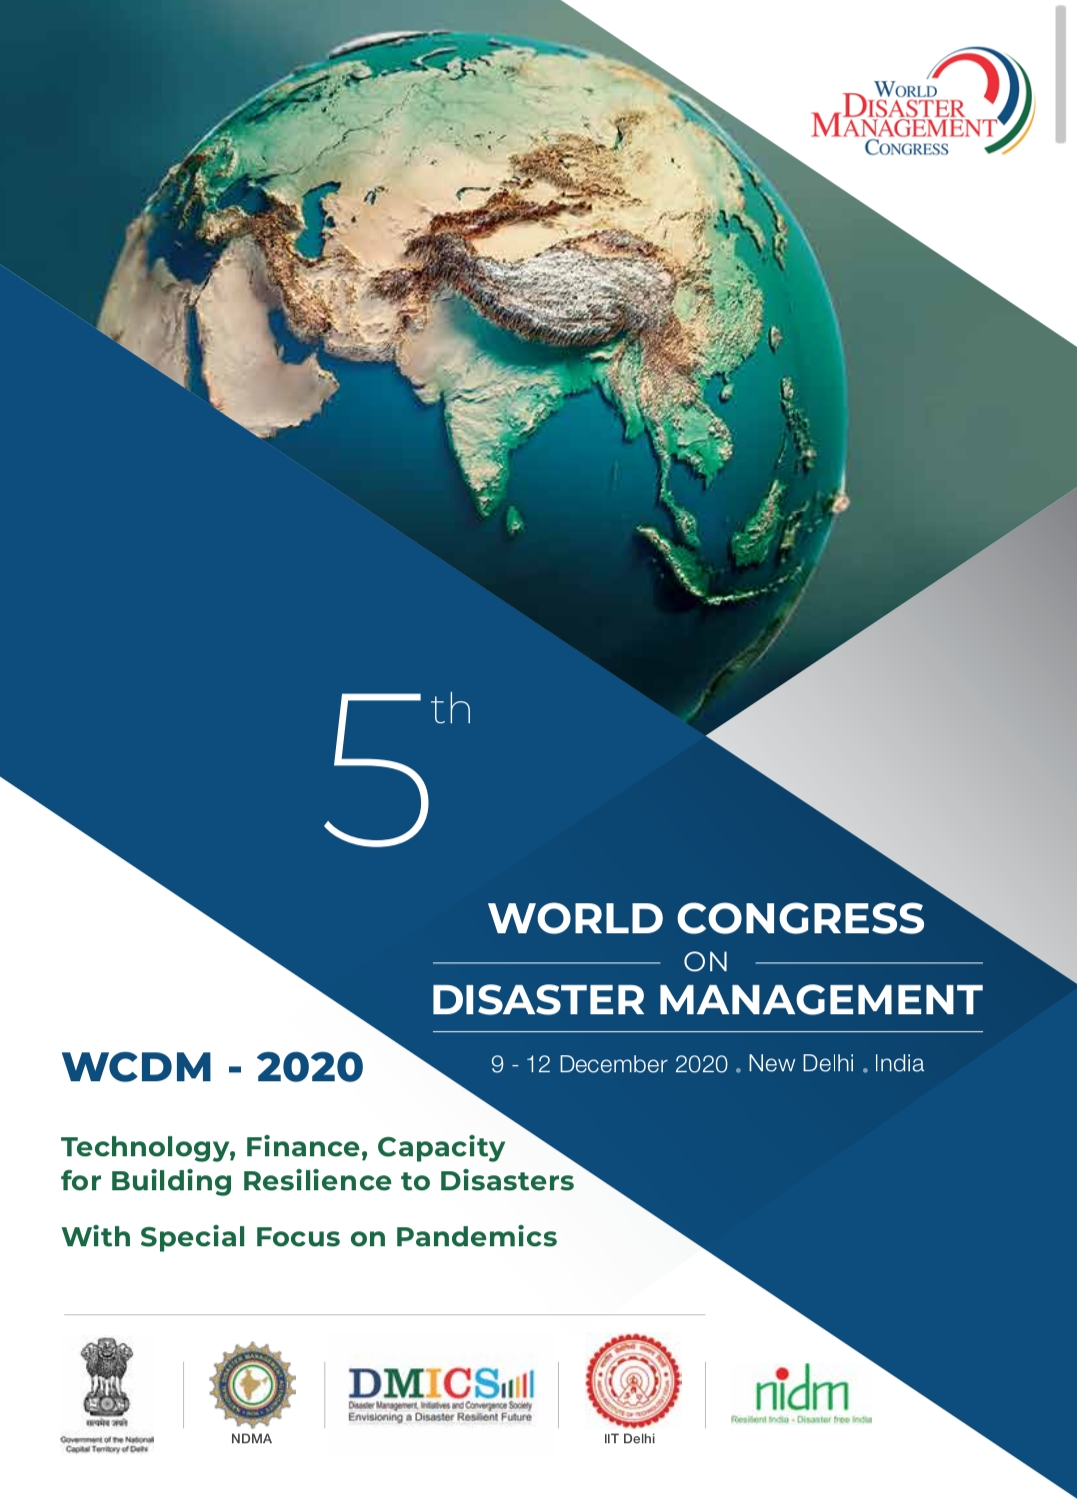 5th WORLD CONFERENCE ON DISASTER MANAGEMENTD9-12 december 2020  New Delhi India.